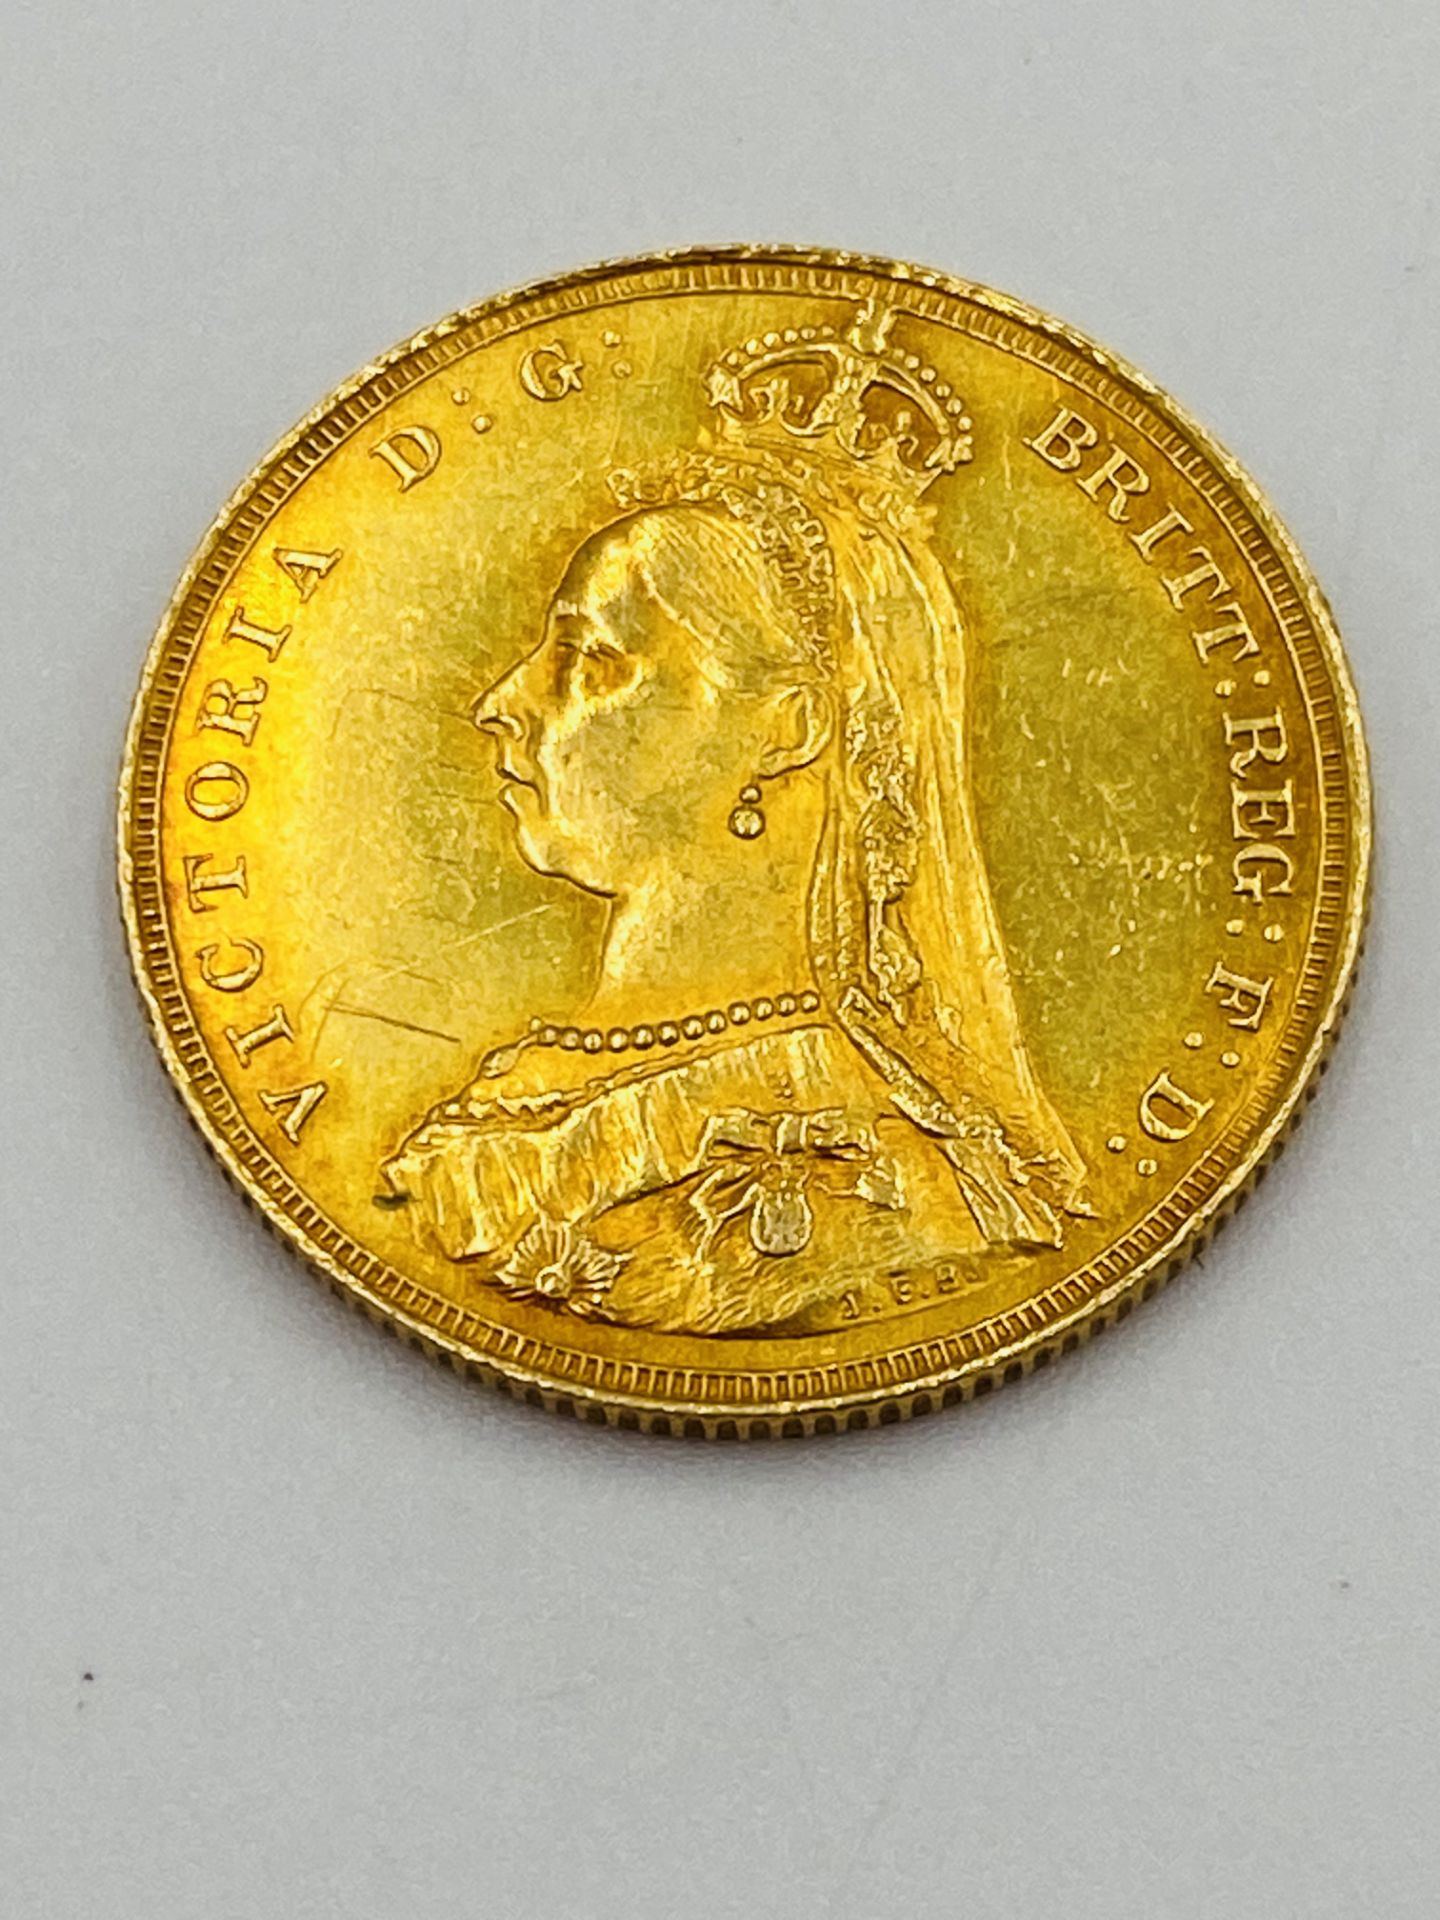 Victorian gold sovereign - Image 2 of 2